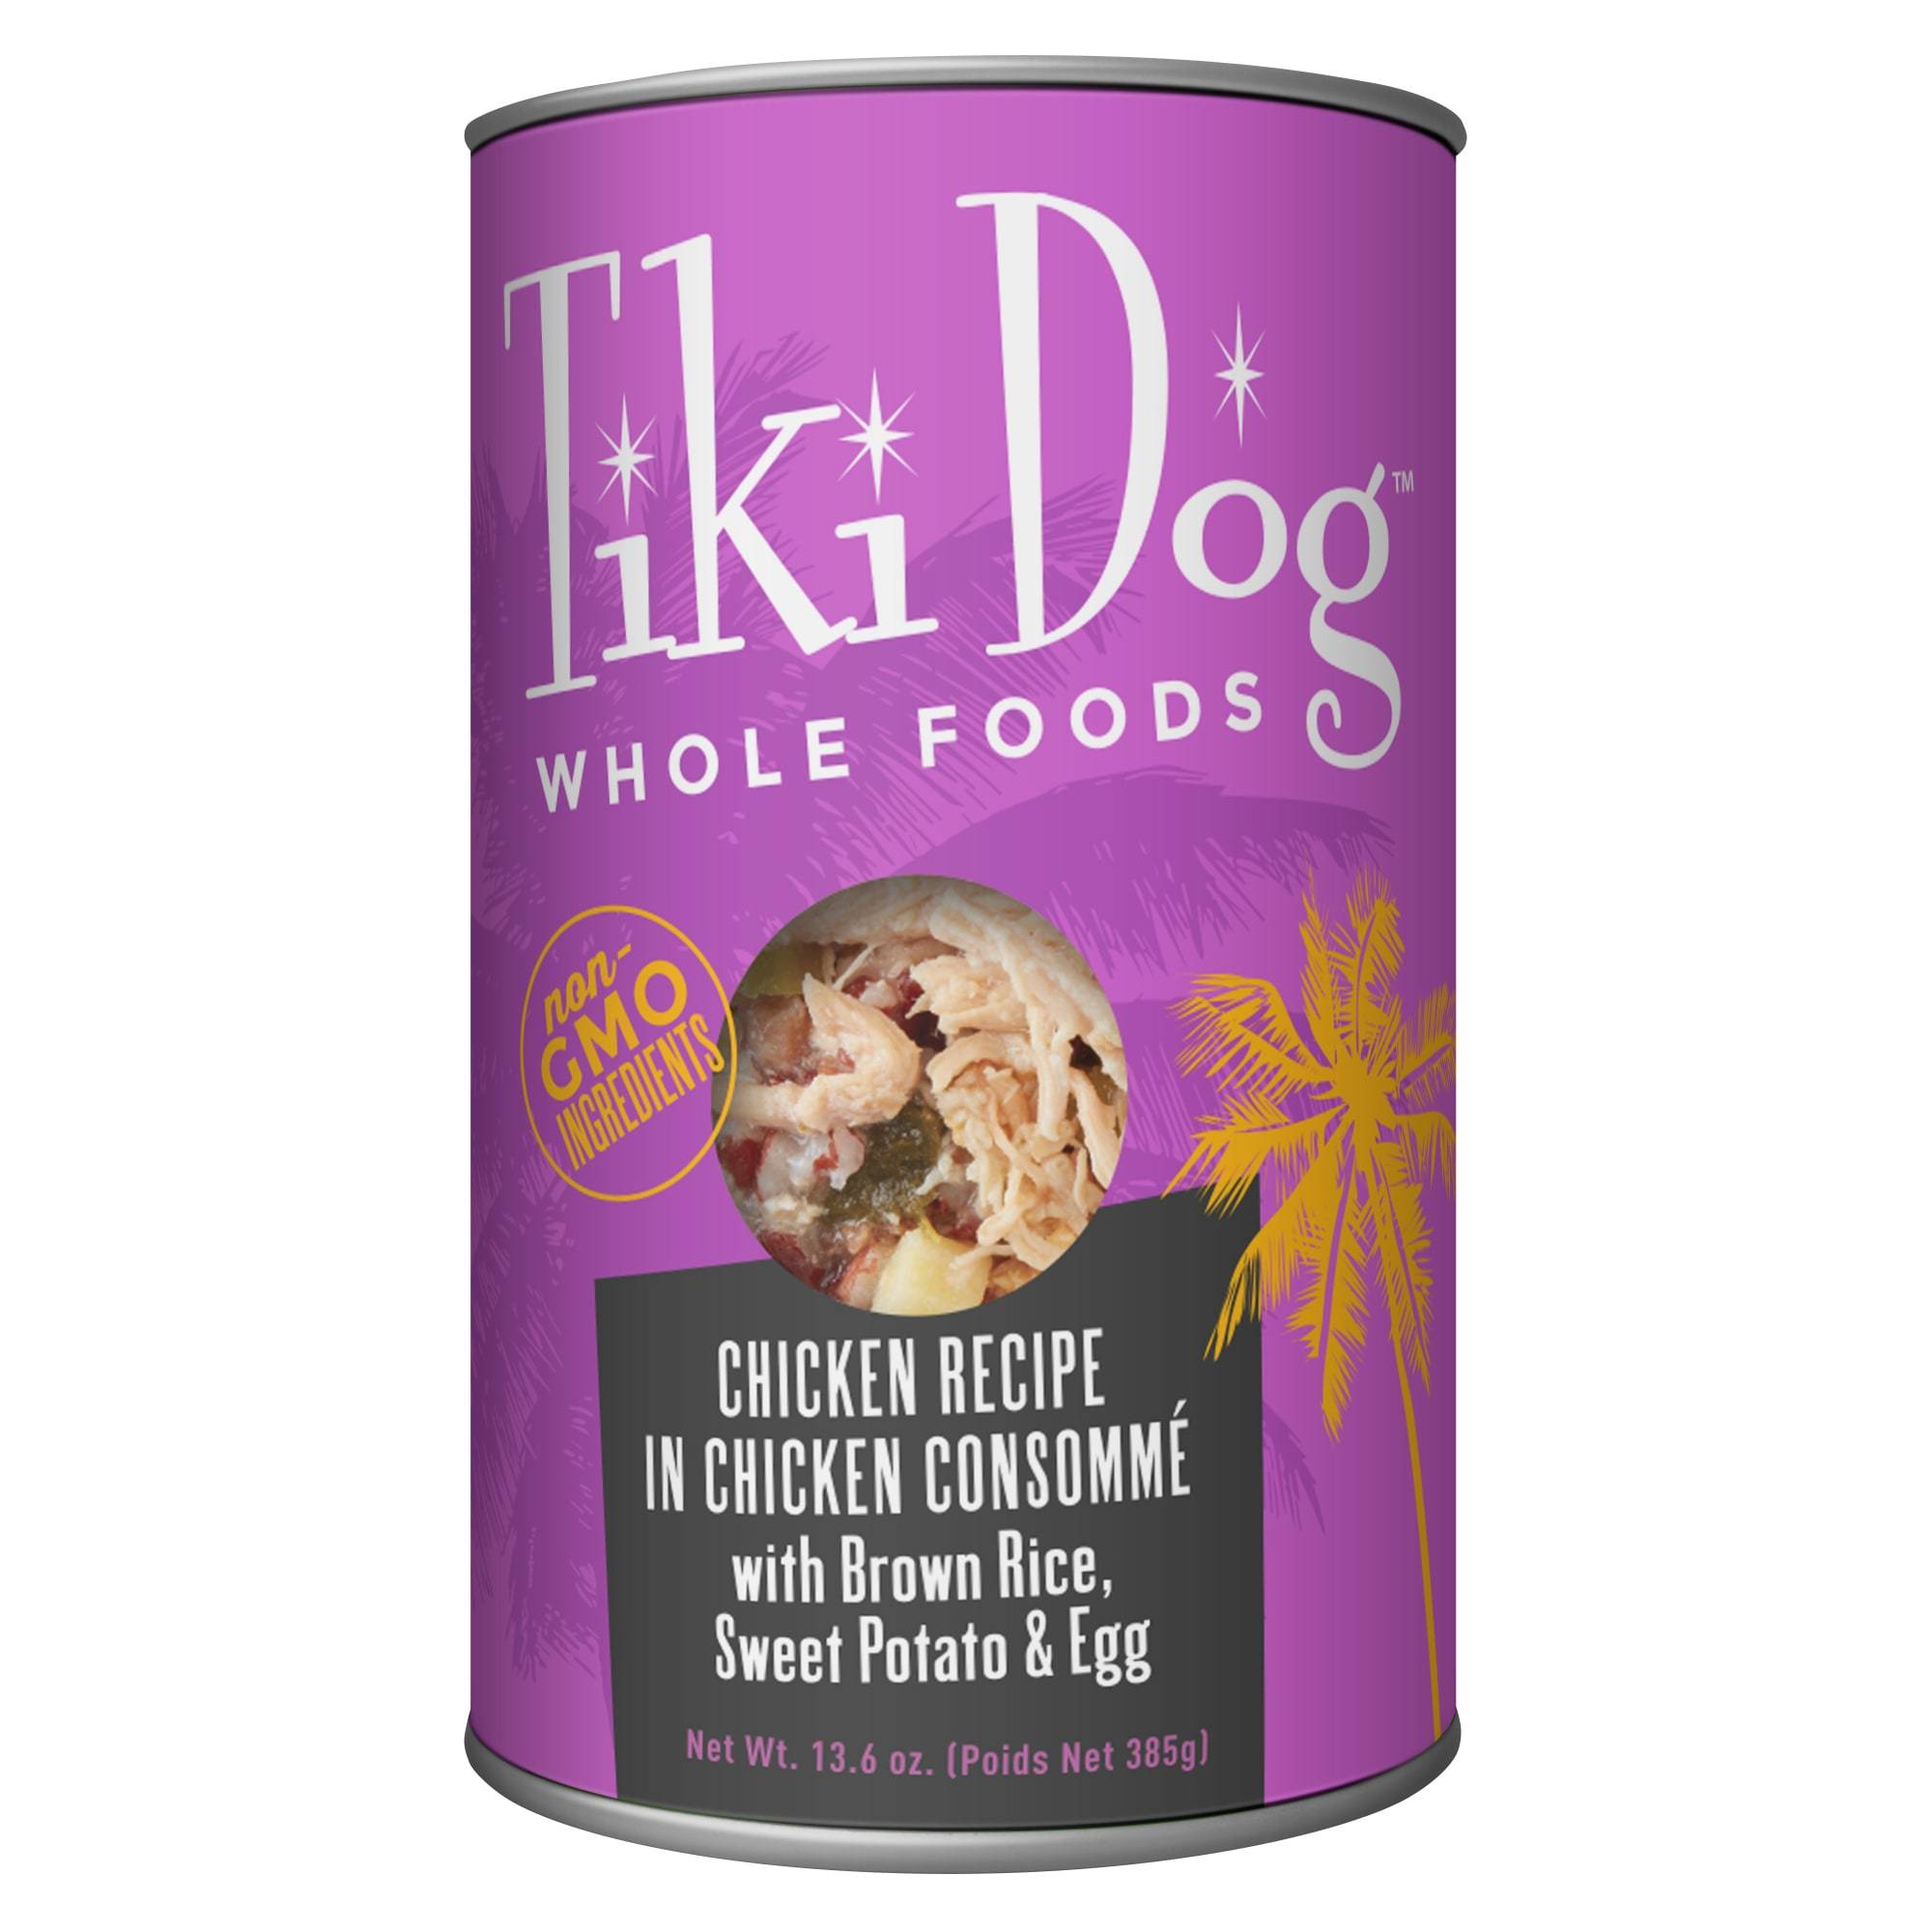 Tiki Dog Luau Chicken in Chicken Consomme with Brown Rice Sweet Potato & Egg Whole Wet Dog Food - 13.6 oz Can - Case of 12  